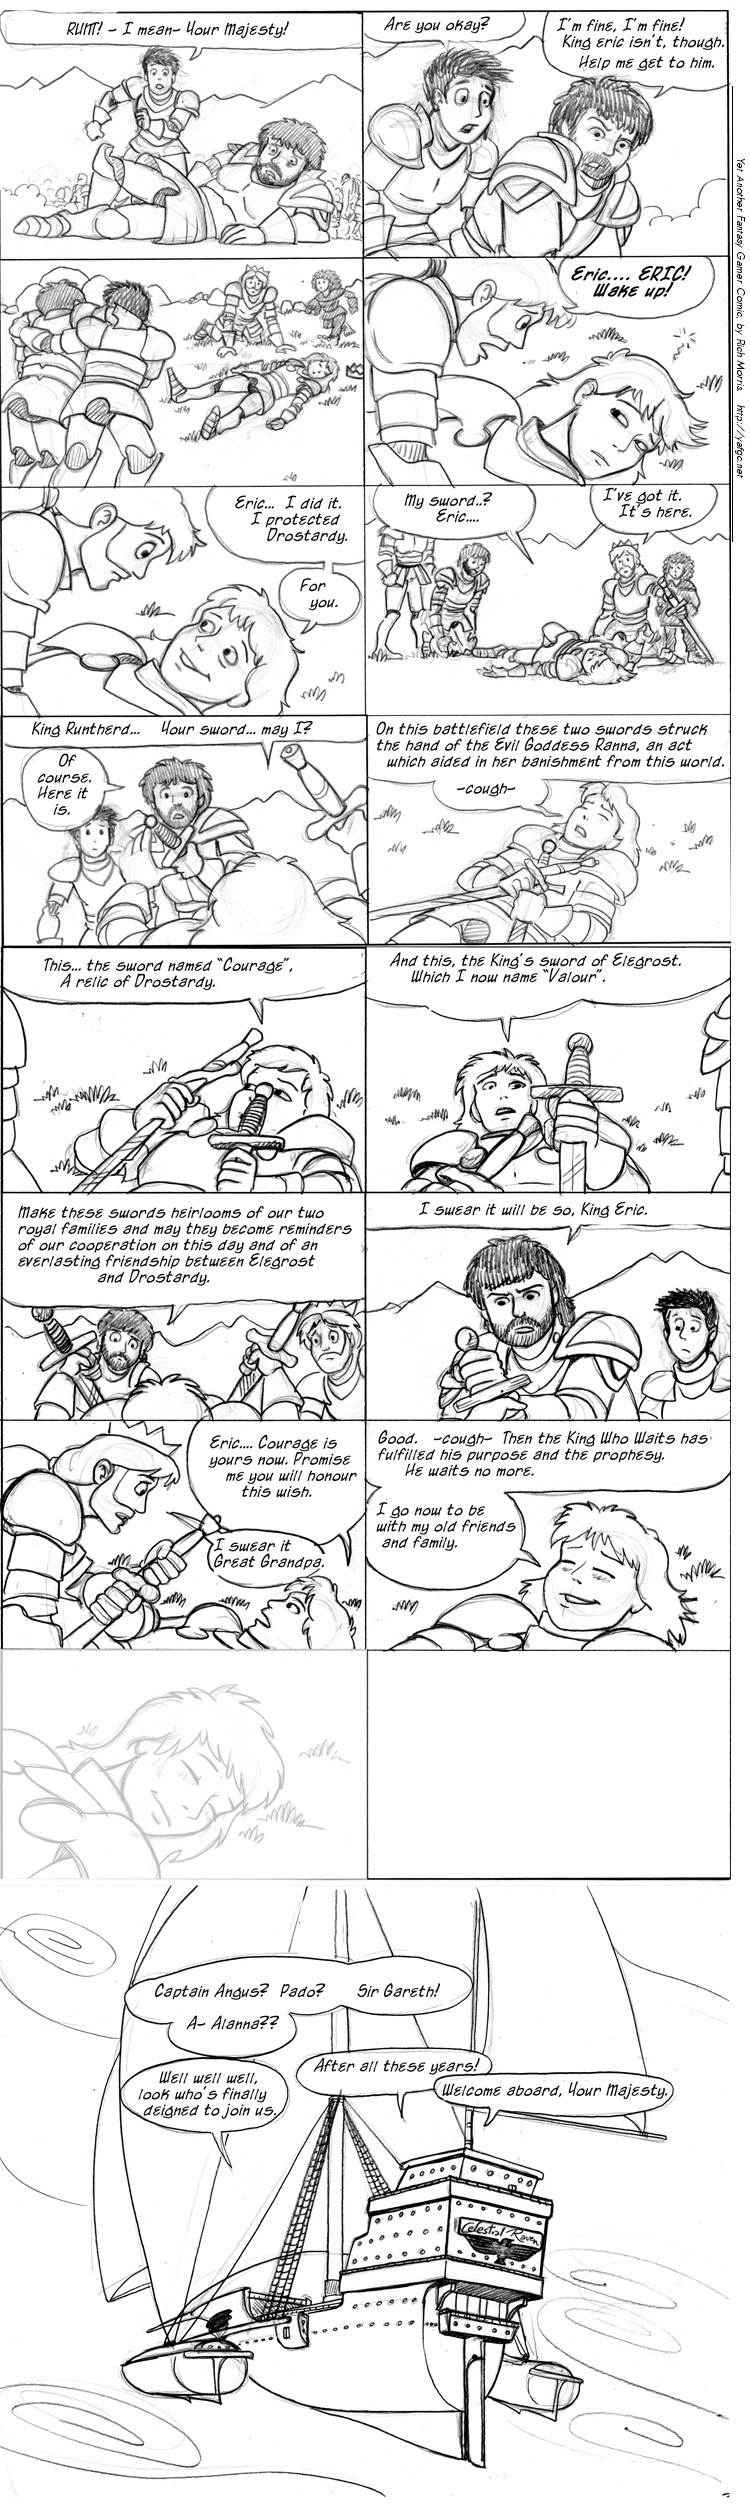 comic-2020-11-04-3400-another-end-another-beginning.jpg